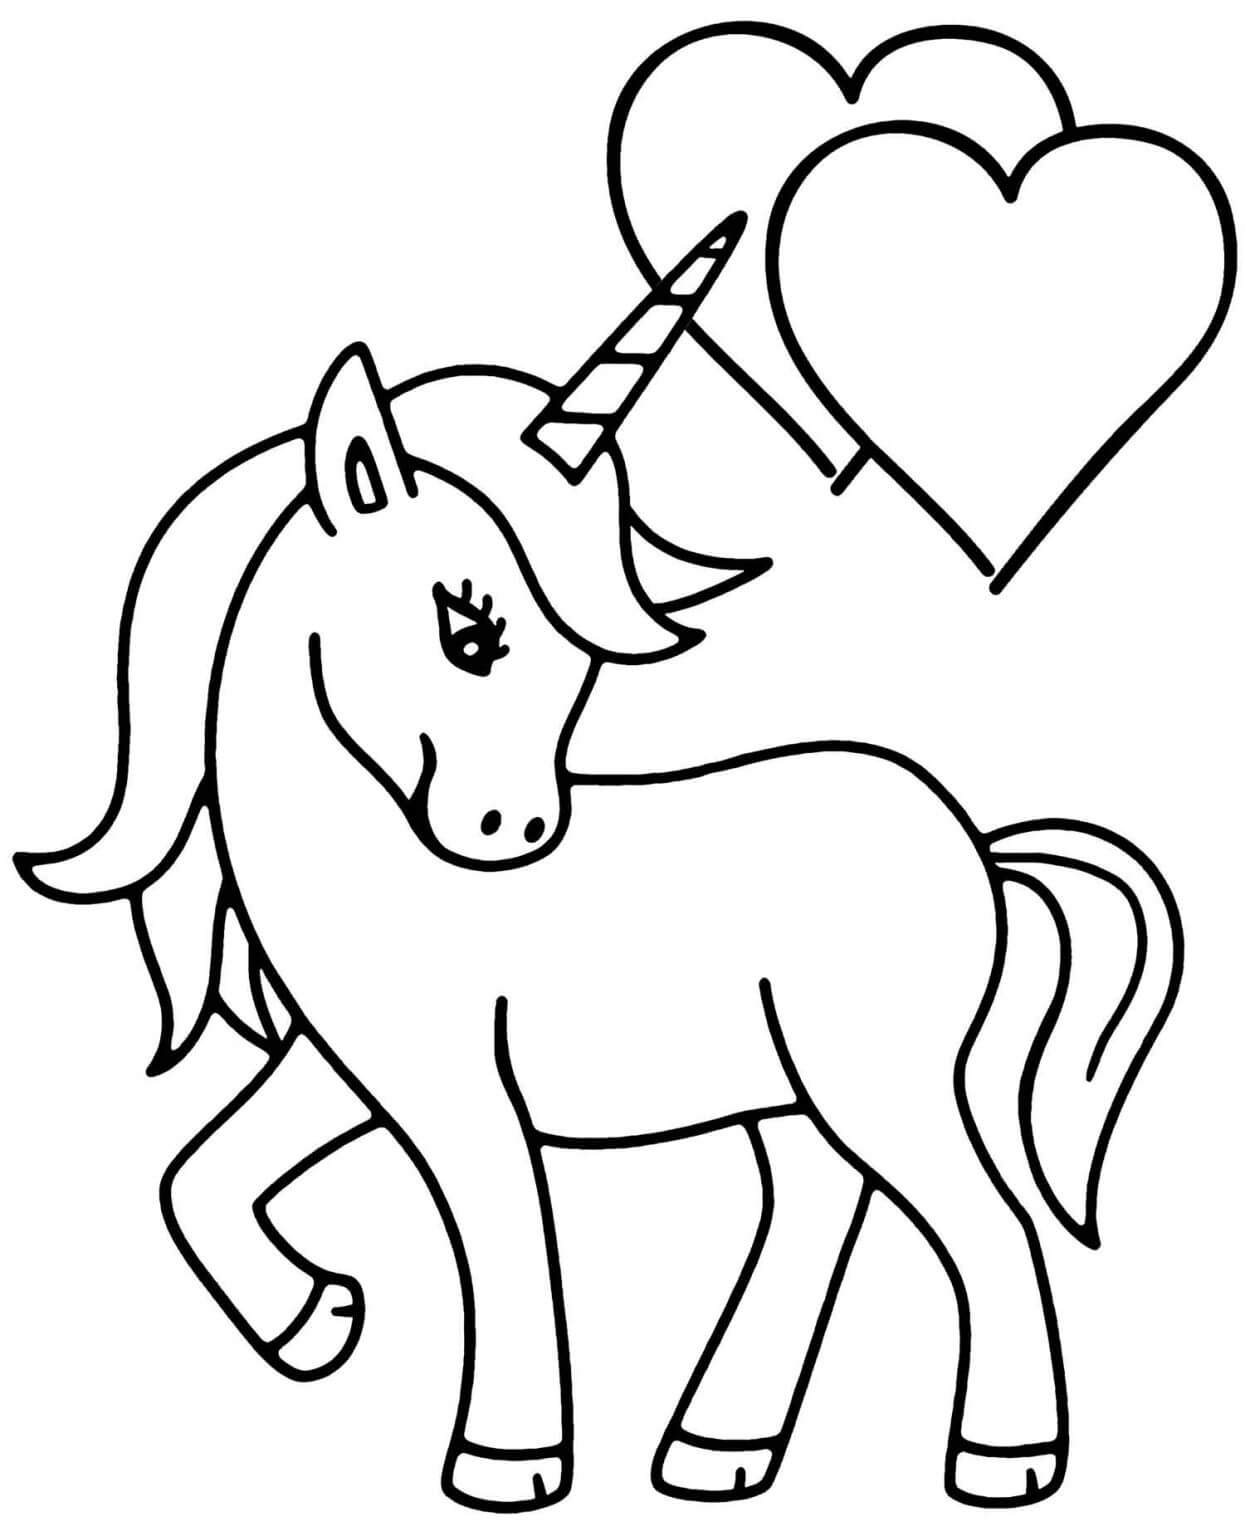 Simple Unicorn Valentine Coloring Pages